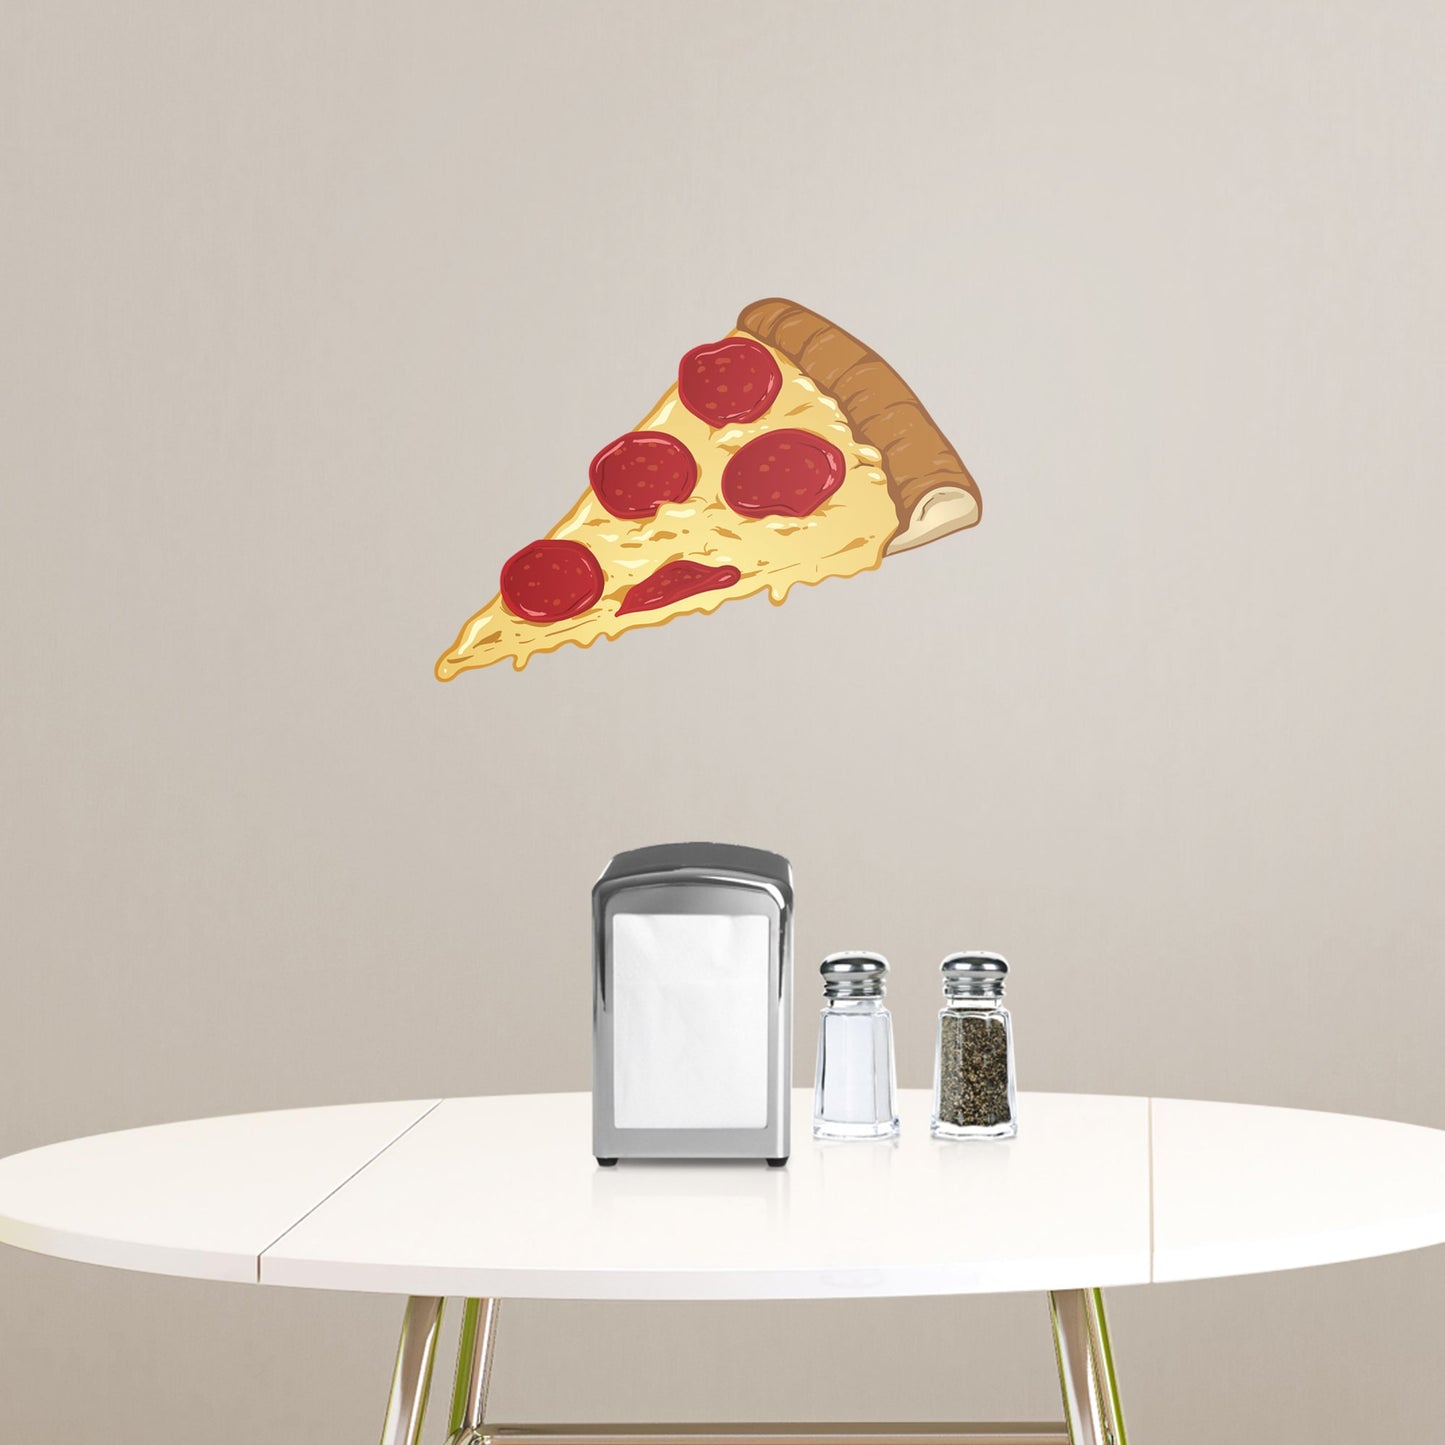 Large Pizza + 2 Decals (15"W x 11"H)